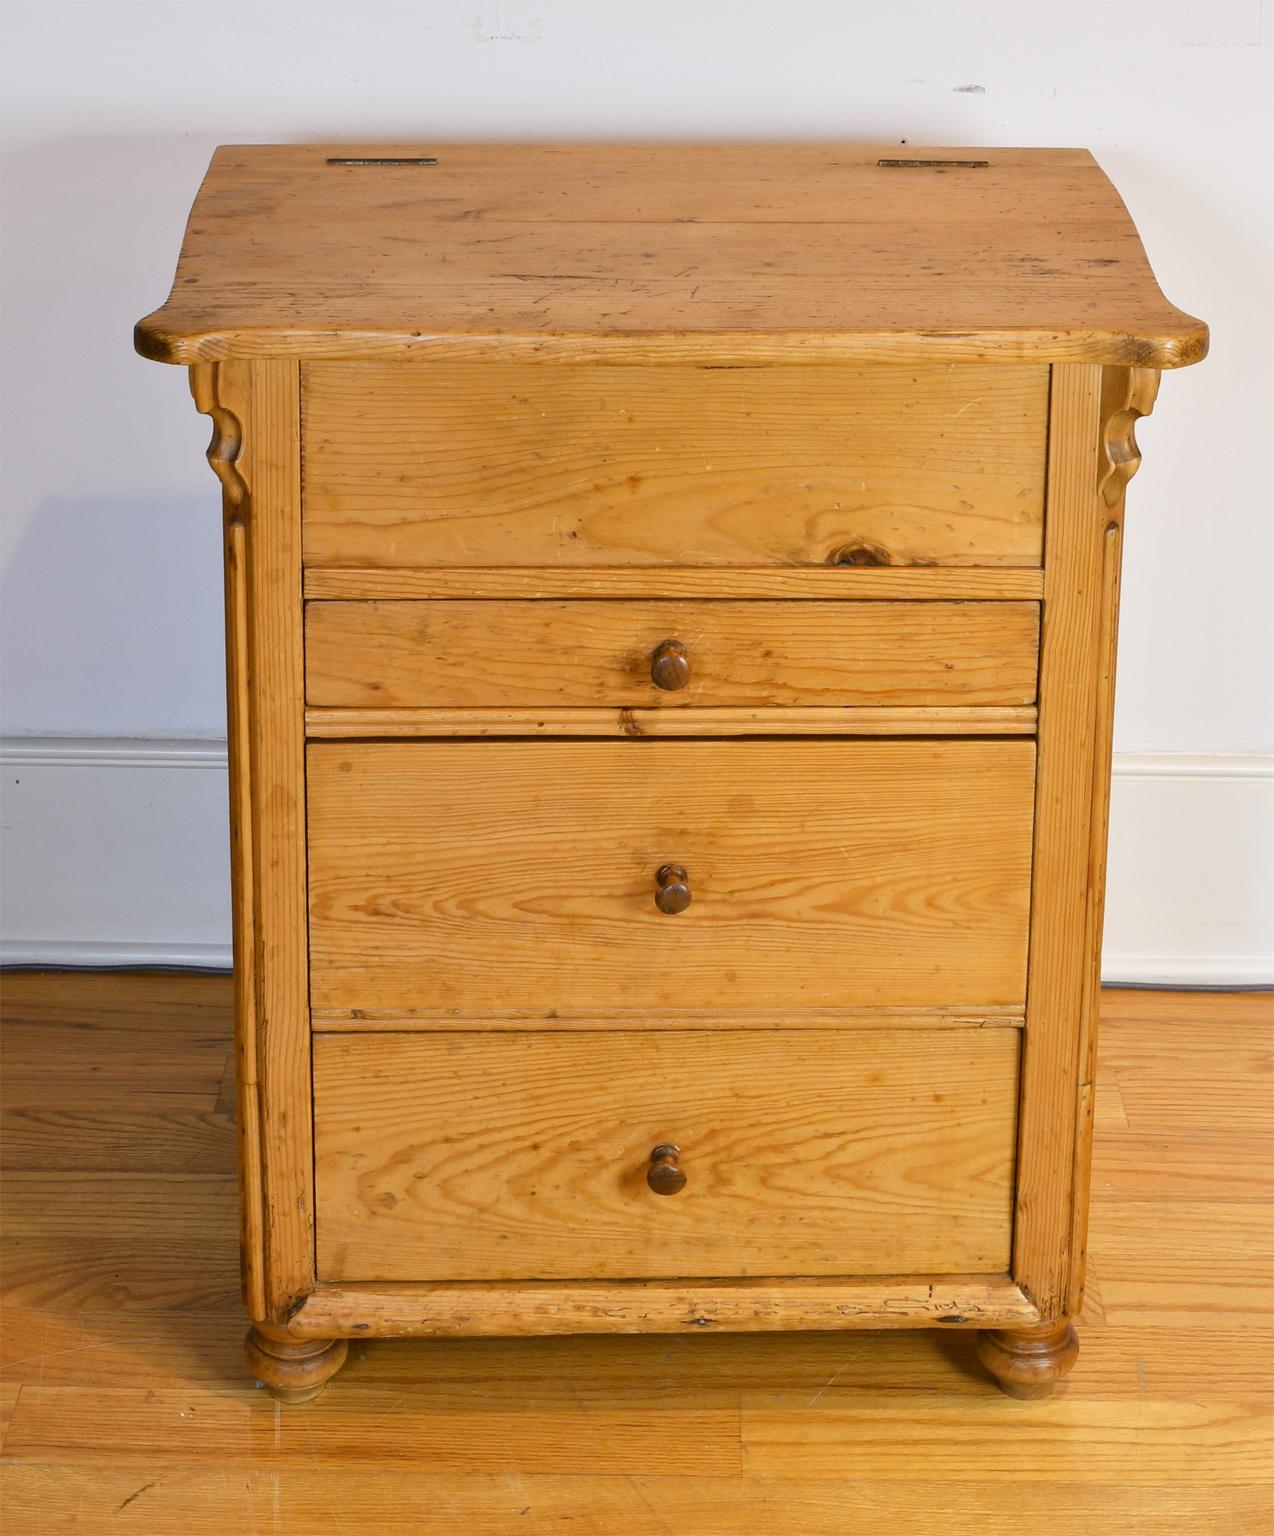 An unusually small antique Louis Philippe chest in light honey-colored pine with three drawers in staggered heights, with original turned wooden knobs, and resting on four turned feet. Top lifts to a storage compartment that would have held a